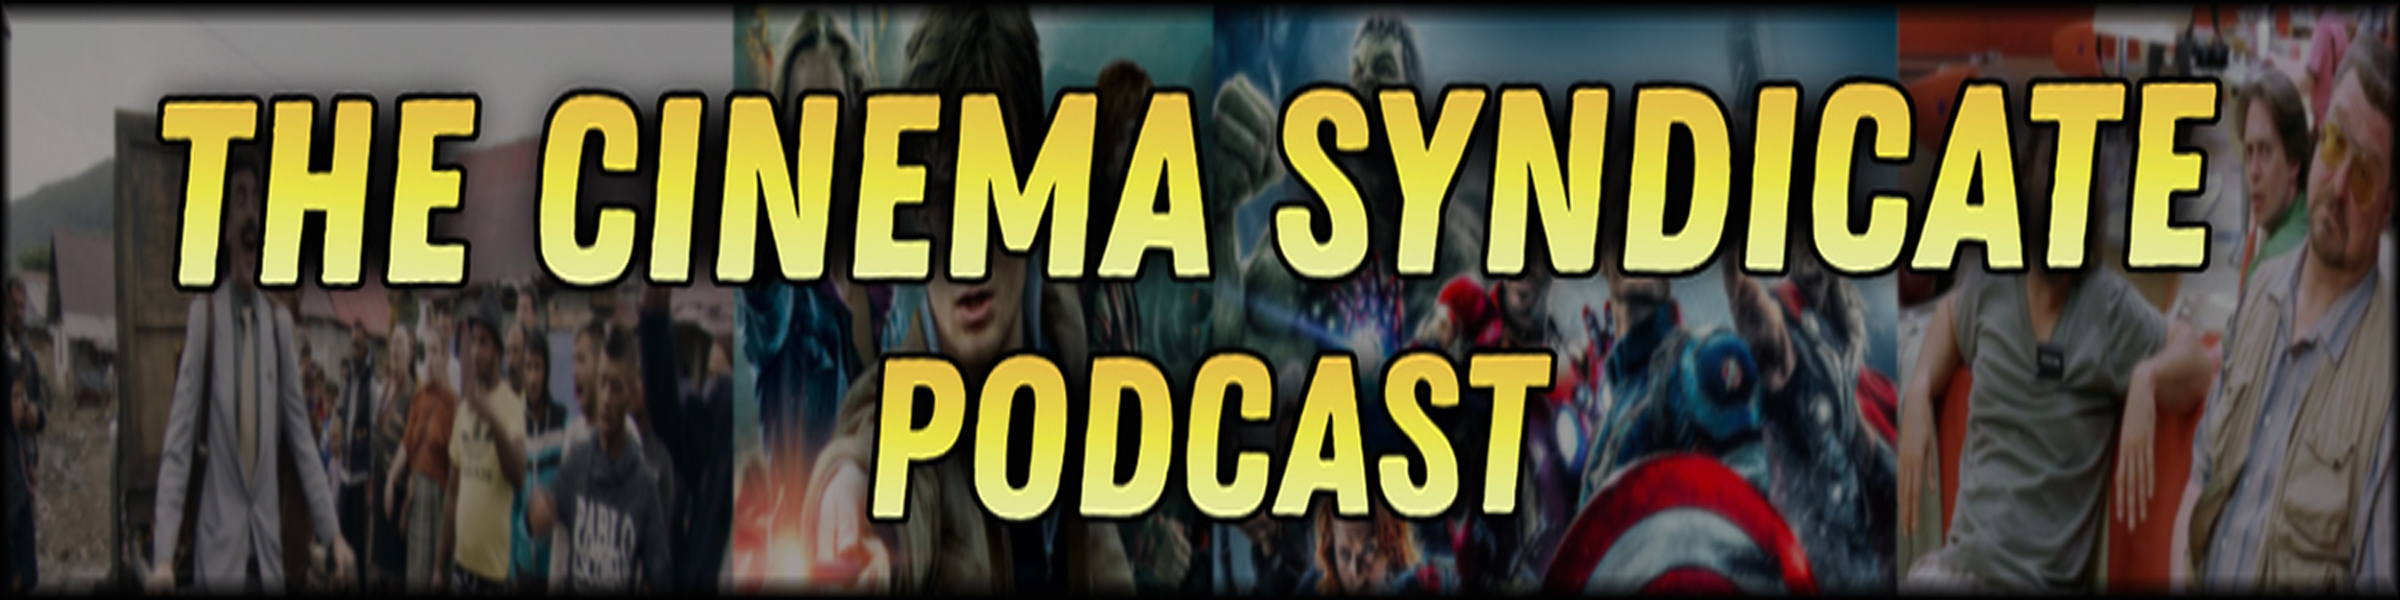 The Cinema Syndicate Podcast